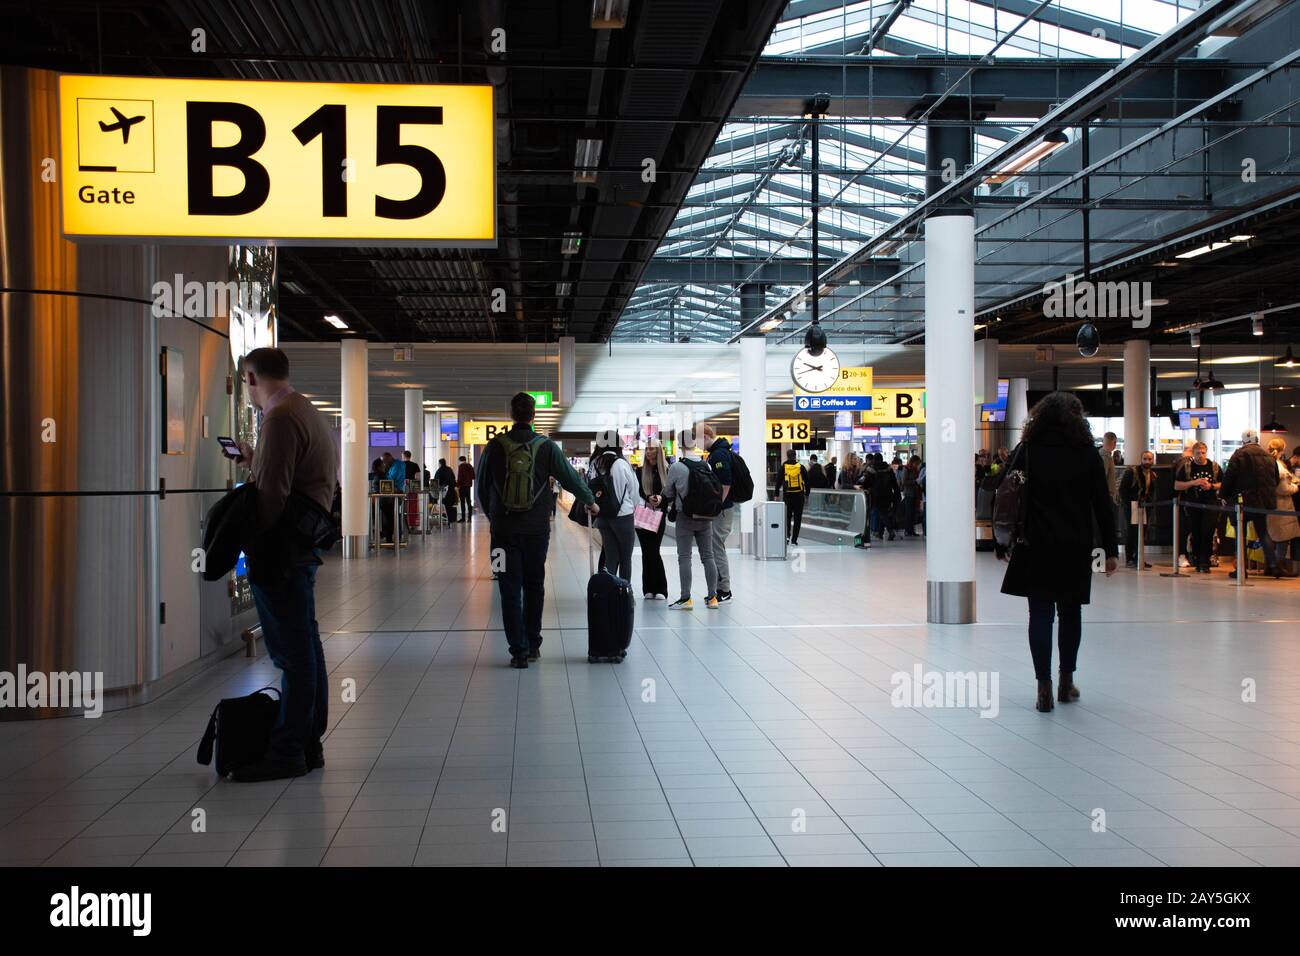 Airport terminal gate with gate number for departing flights, passengers waiting with luggage and suitcase Stock Photo